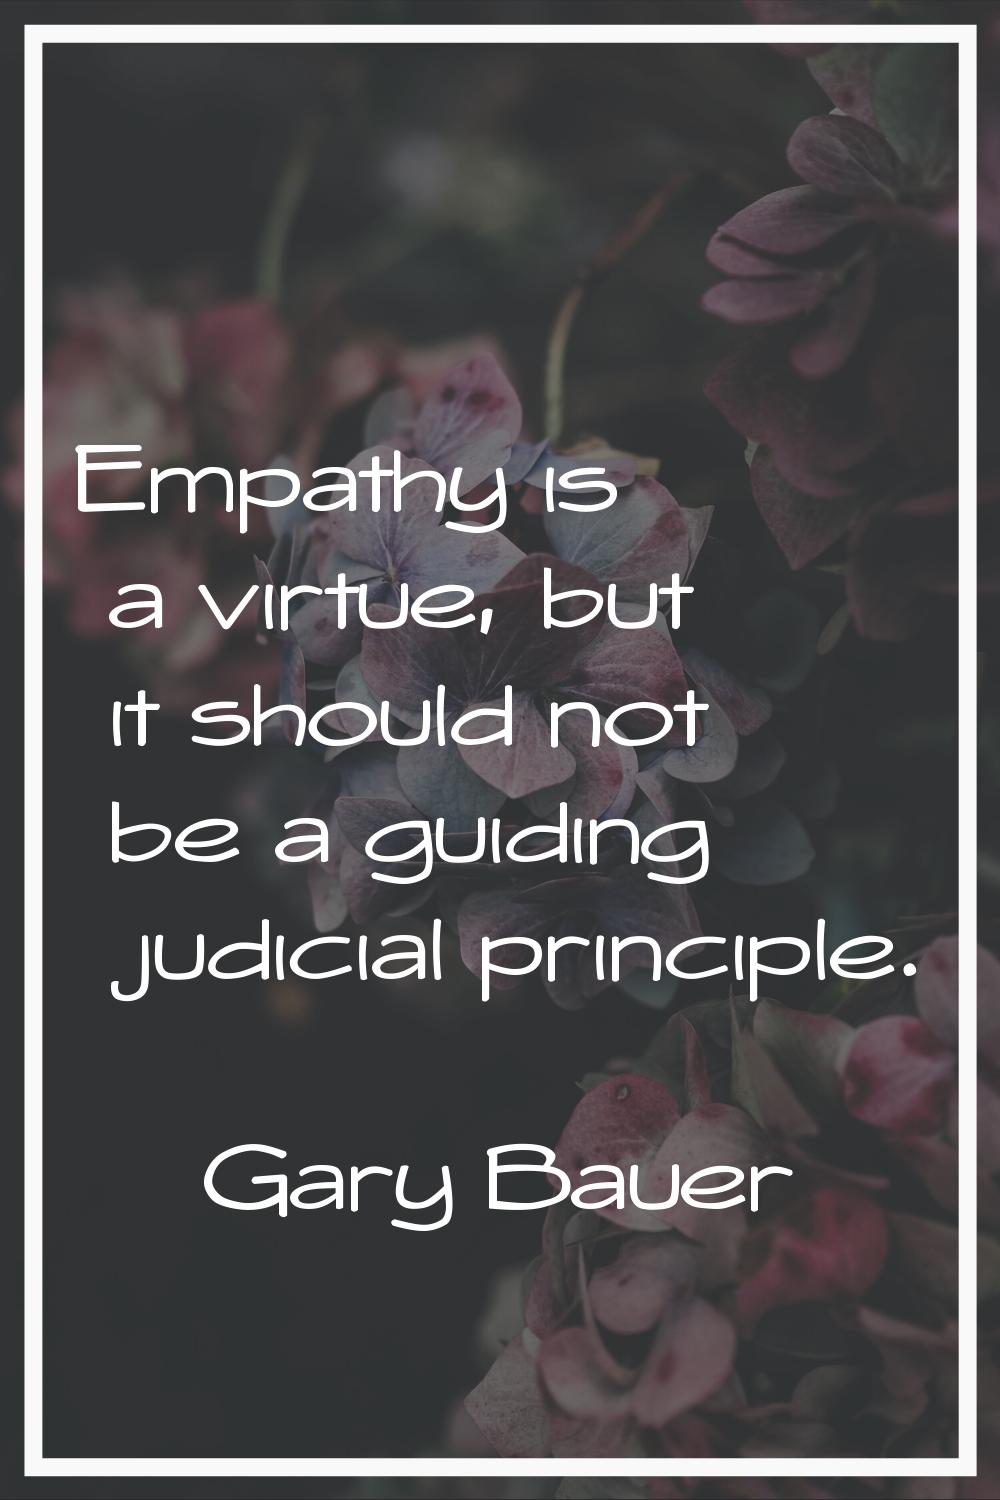 Empathy is a virtue, but it should not be a guiding judicial principle.